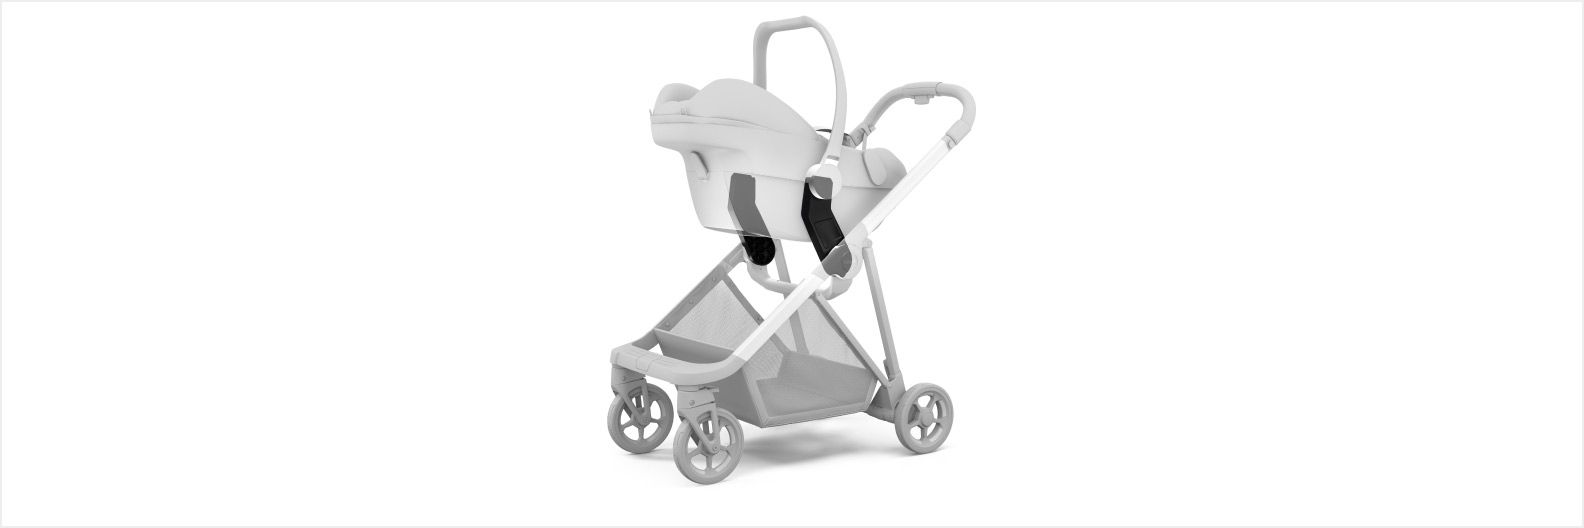 A 3D rendition with a white background of the Thule Shine car seat stroller with a car seat adapter.